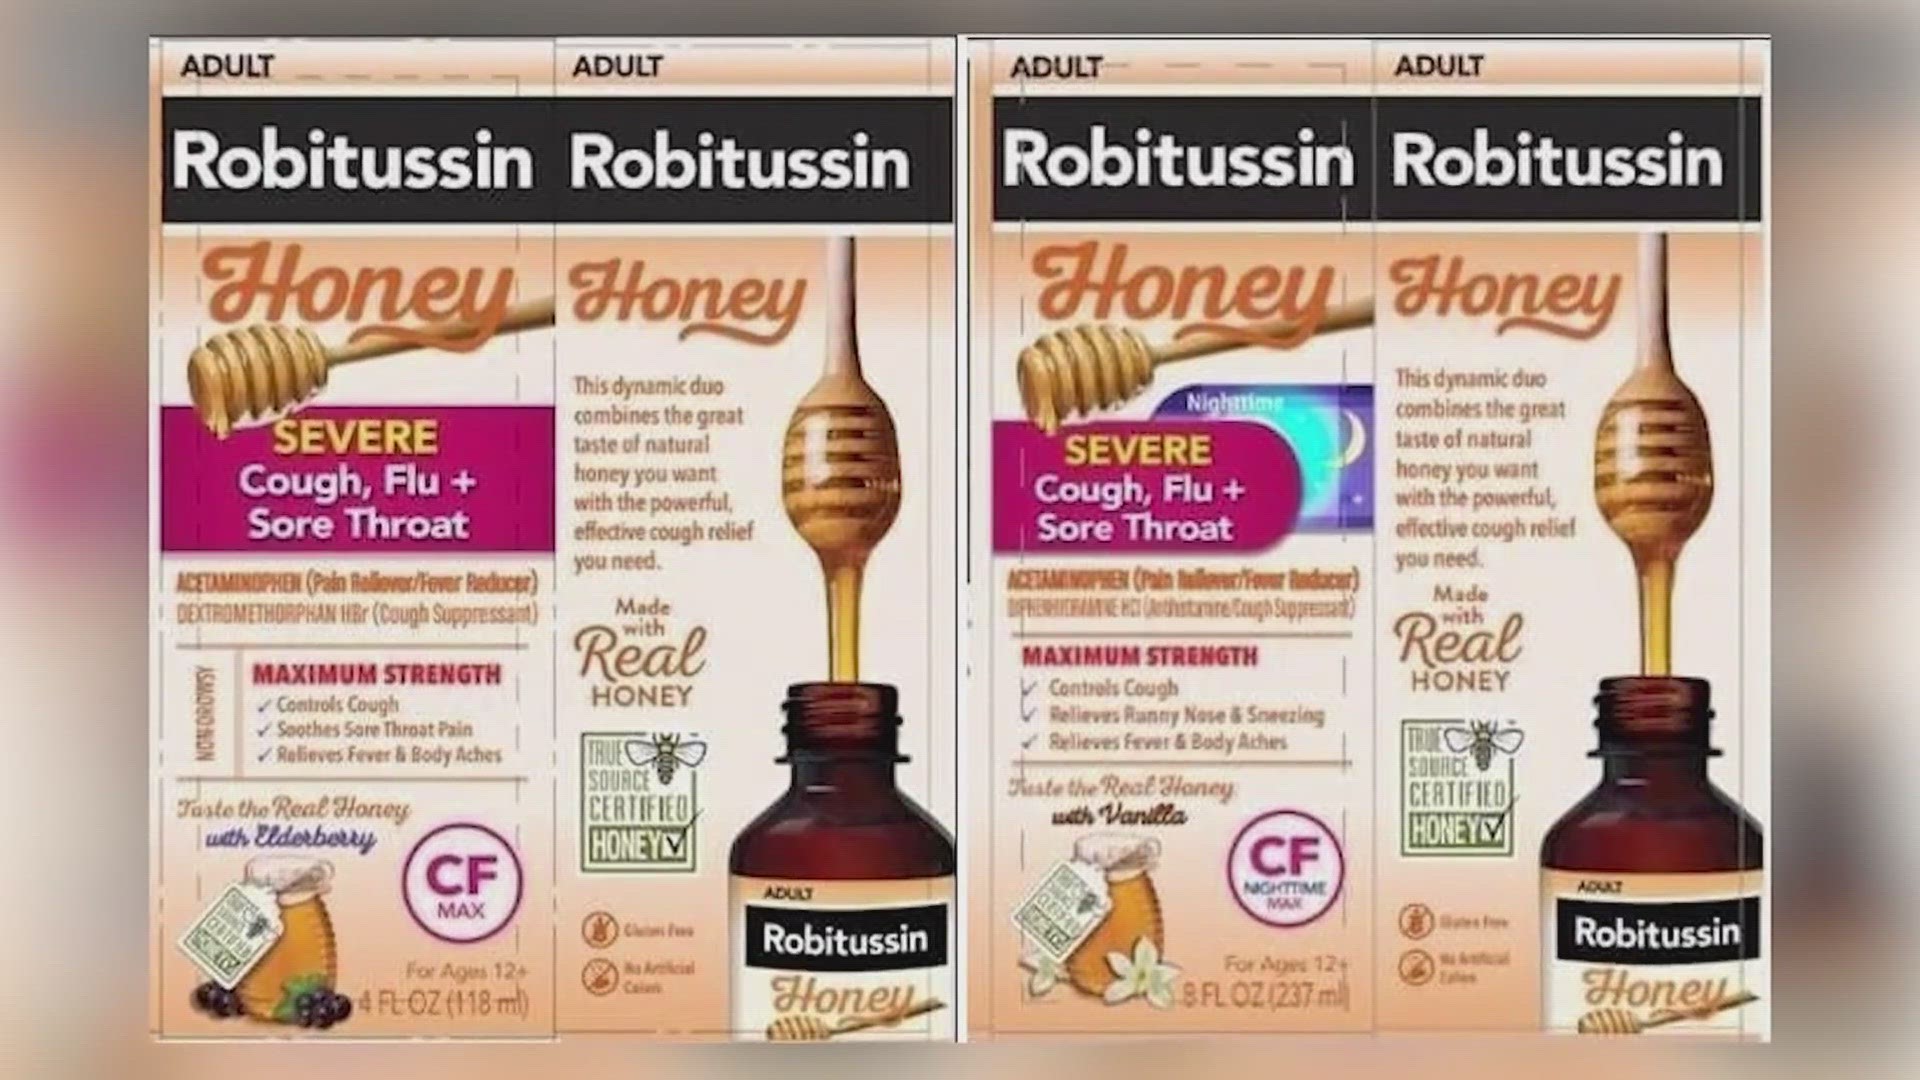 Two types of Robitussin cough syrup have been recalled because of microbial contamination that could be dangerous for some people.